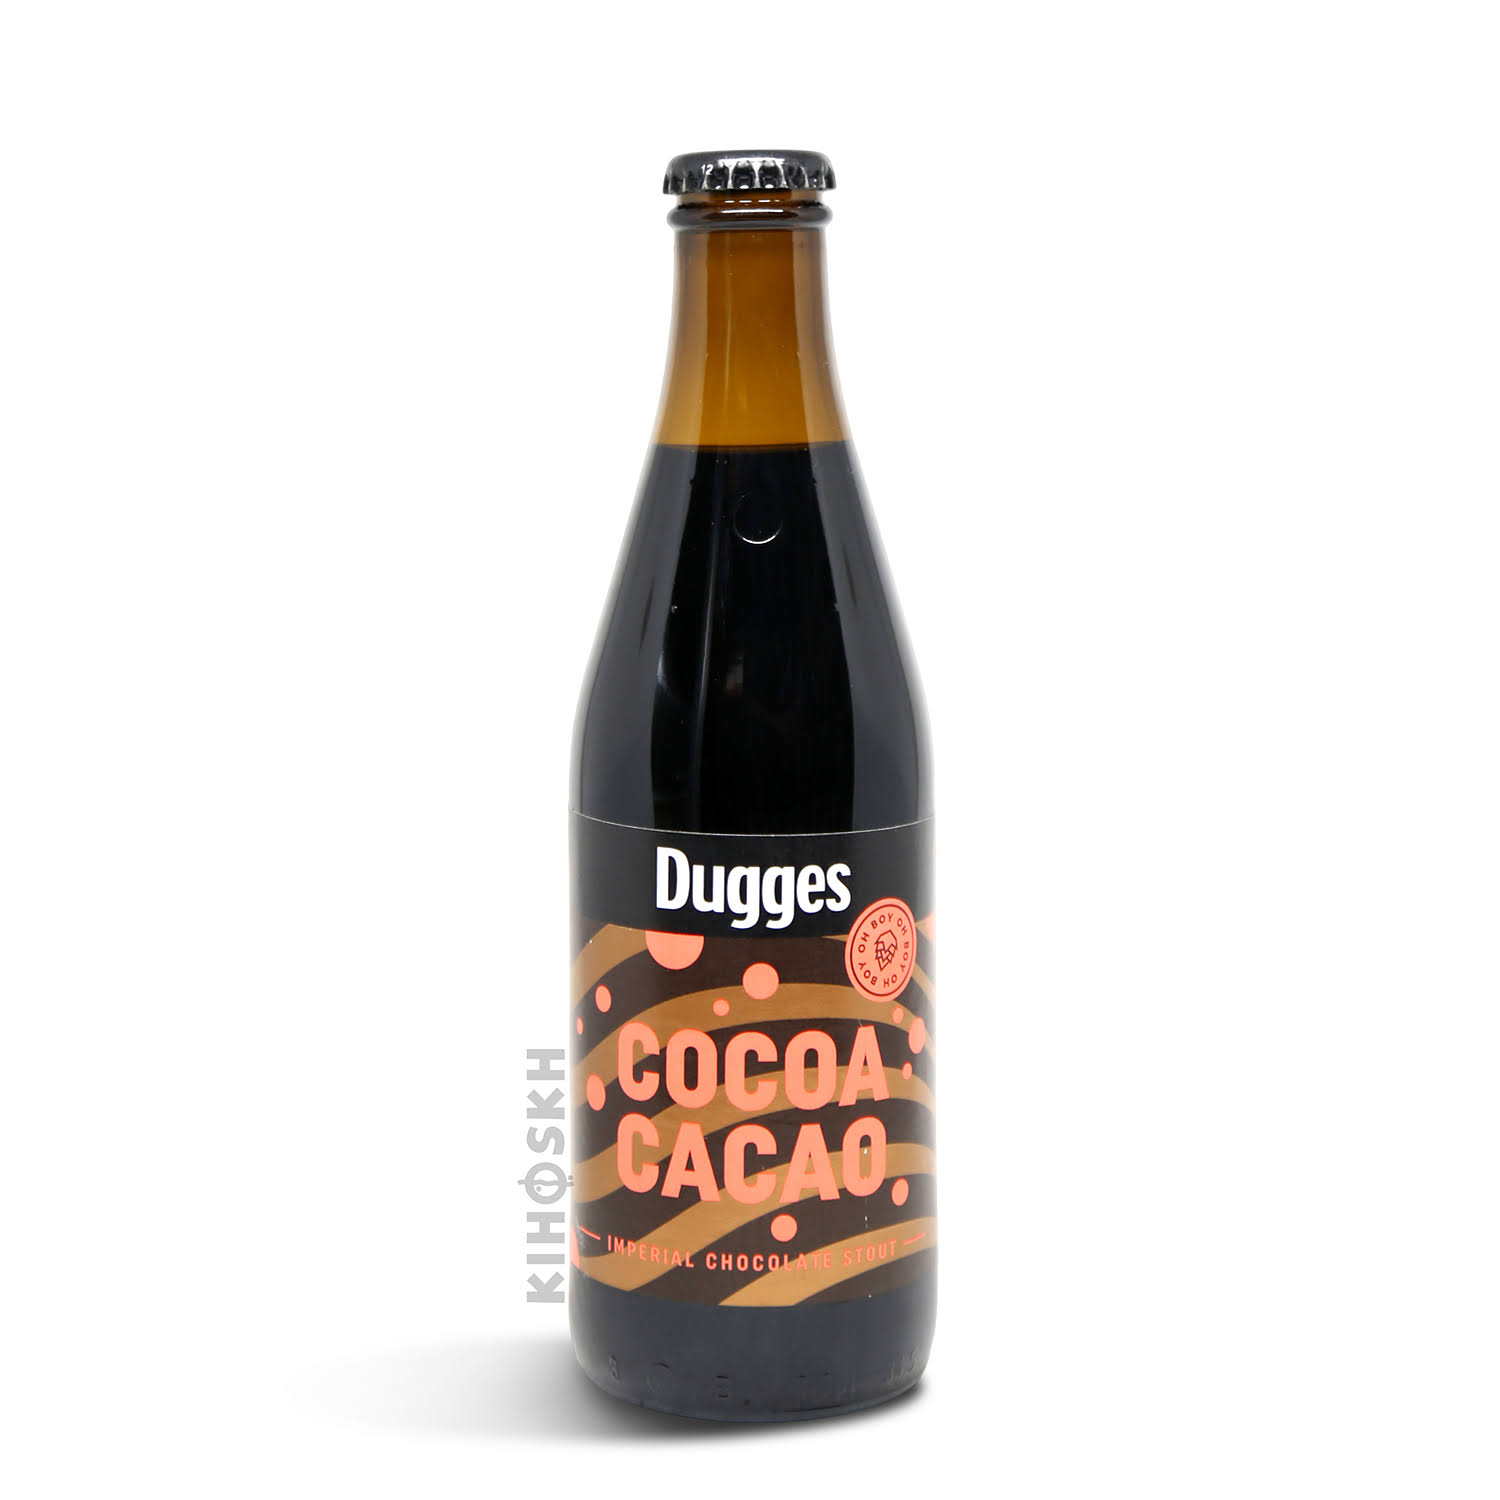 Dugges Beer Darks Cocoa Cacoa Imperial Stout